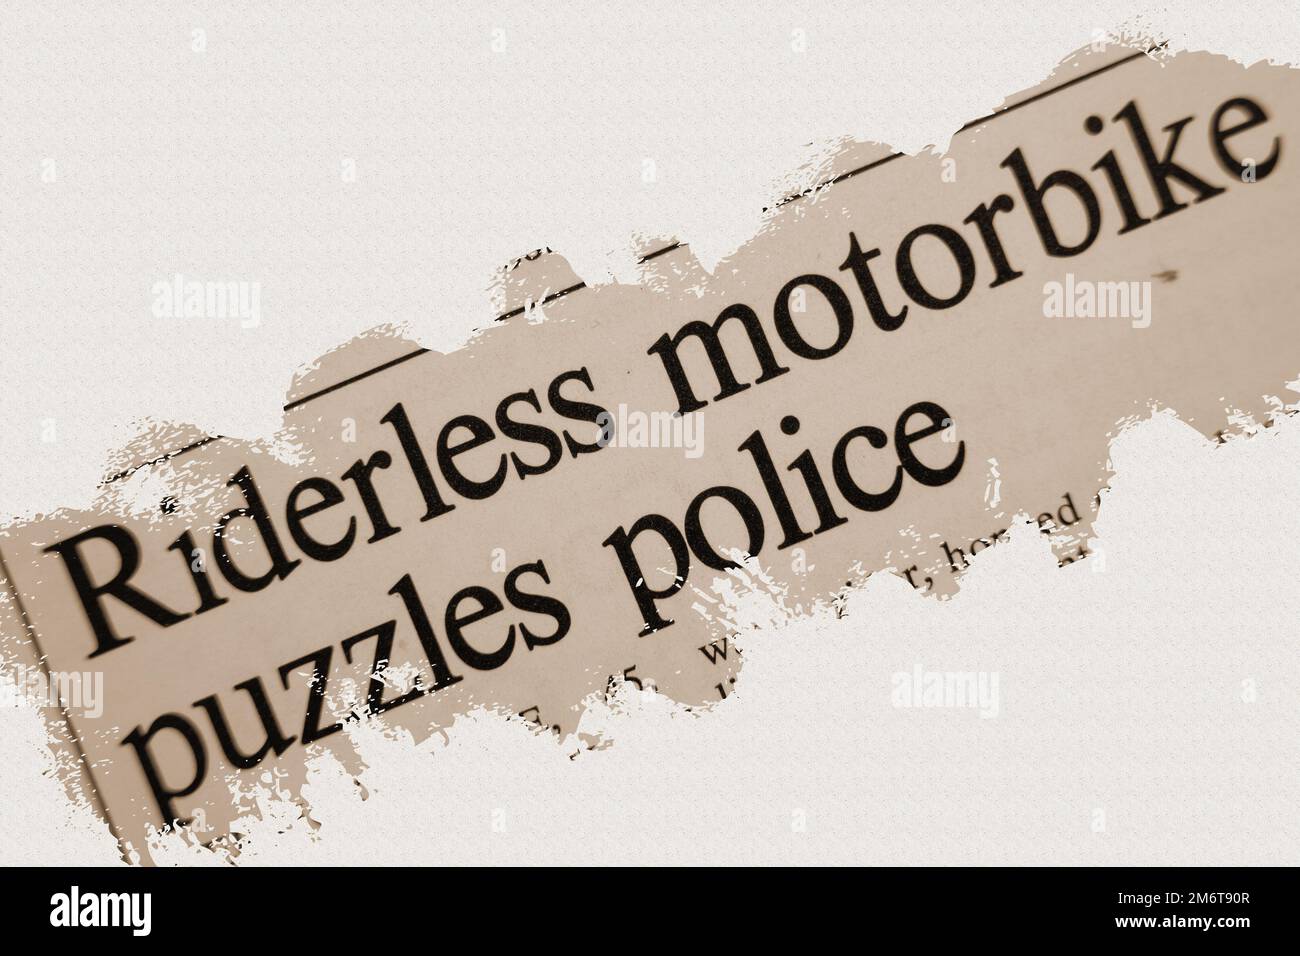 news story from 1975 newspaper headline article title - Rideless motorbike puzzles police - sepia Stock Photo